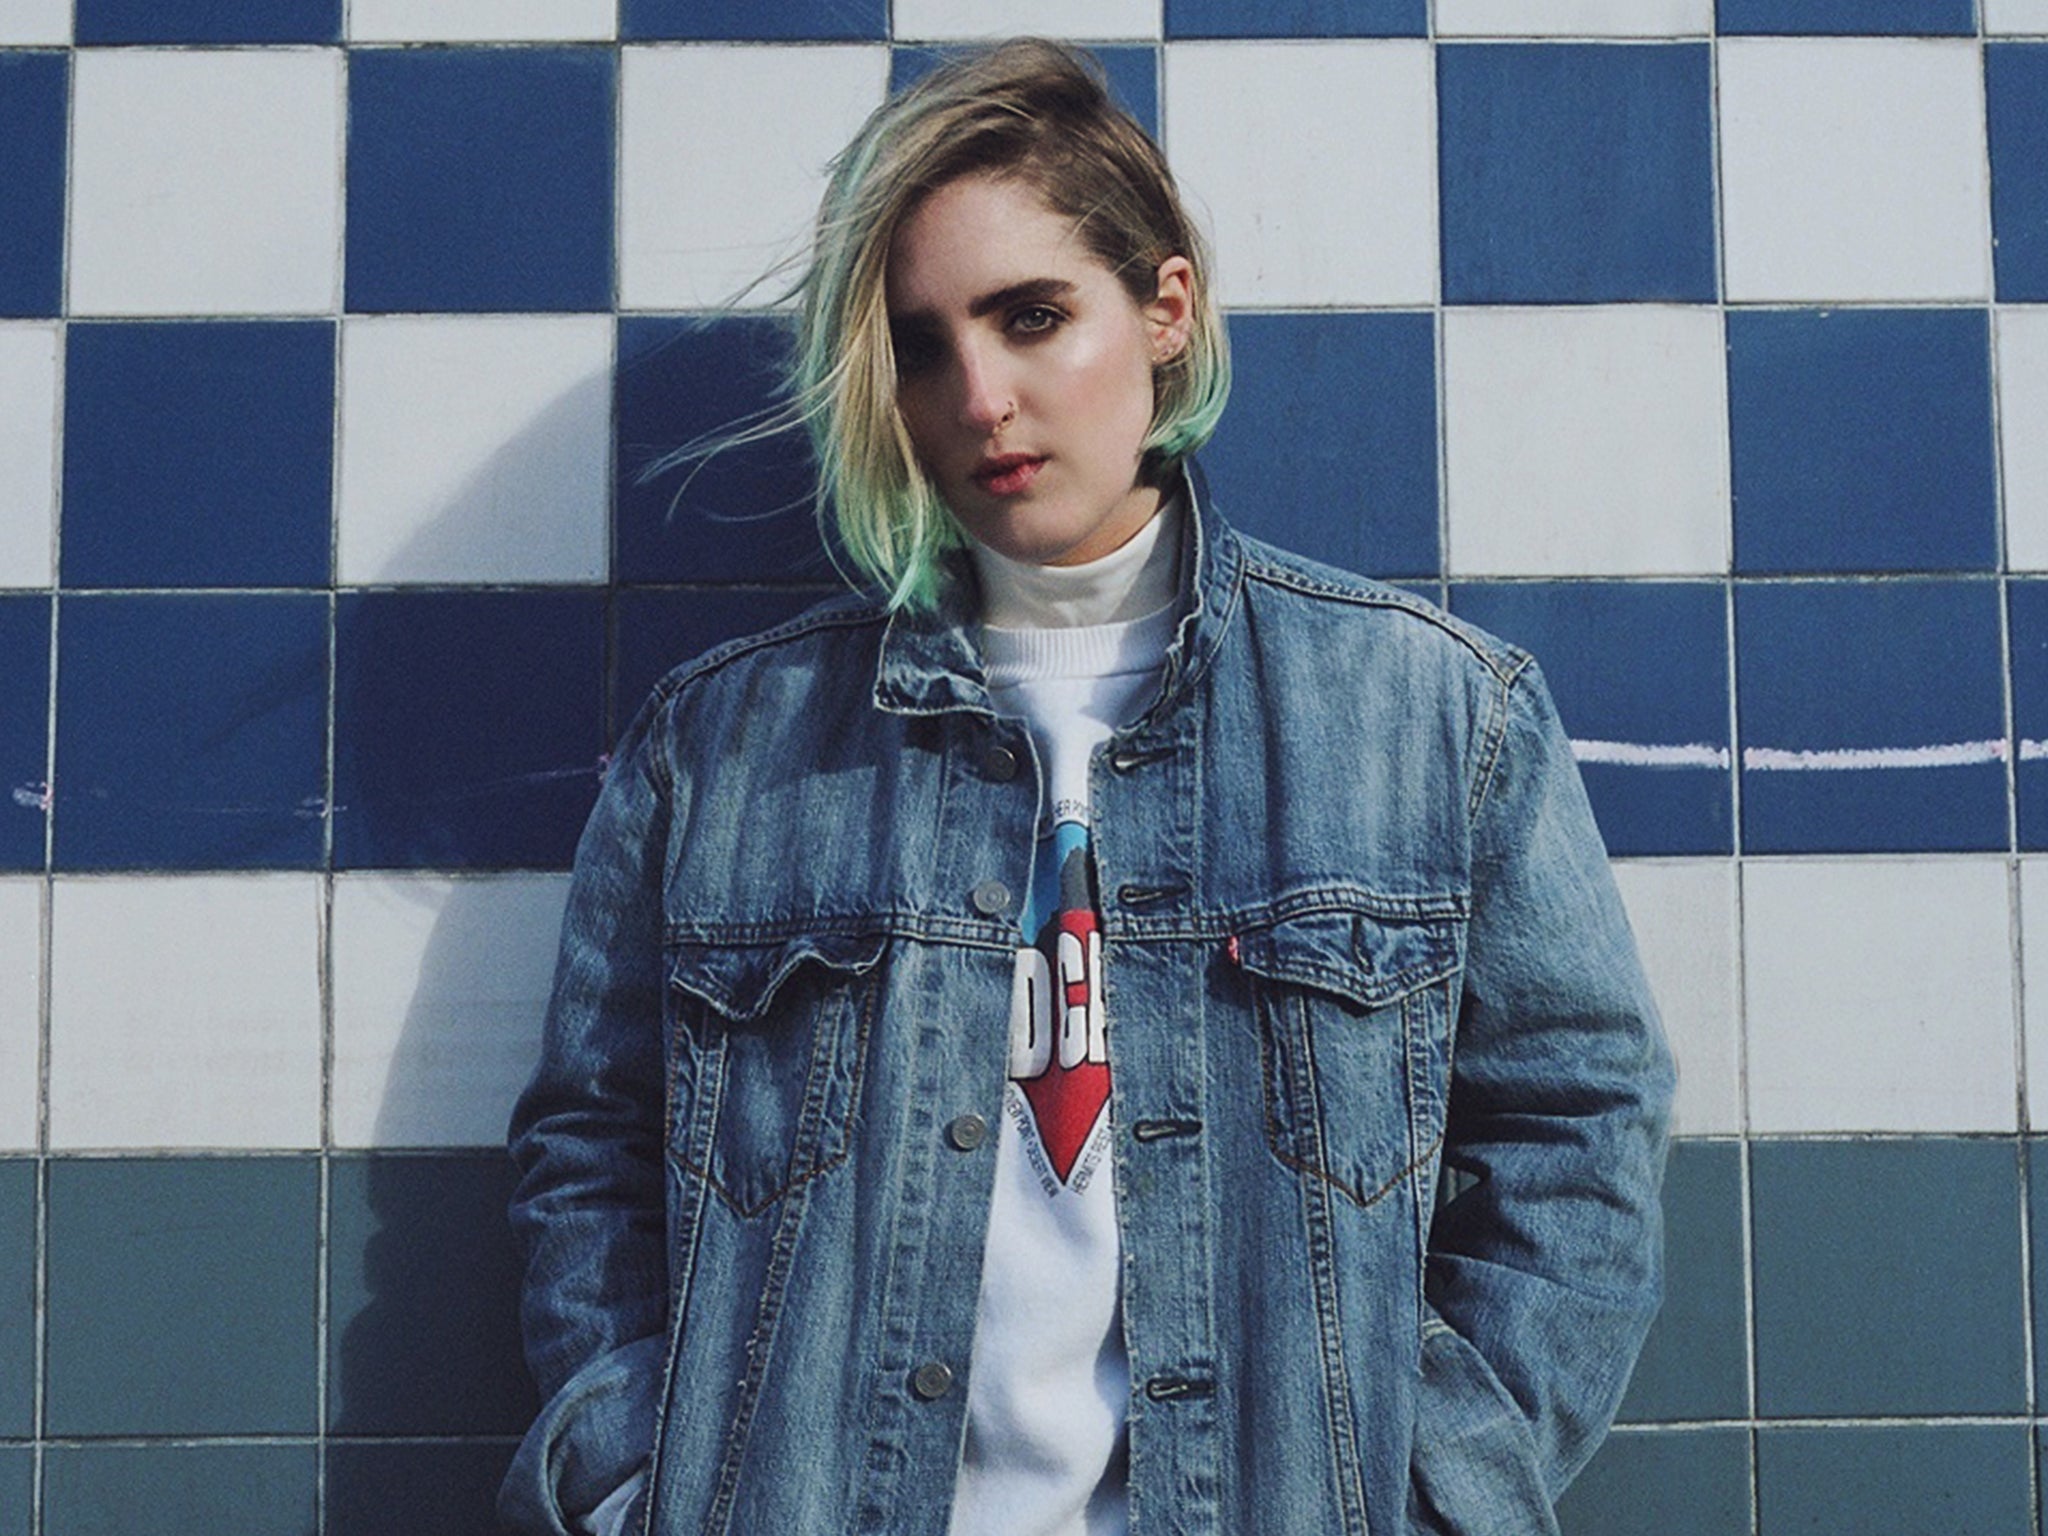 Magic touch: the 23-year-old Shura has over 20 million hits on YouTube with her song ‘Touch’